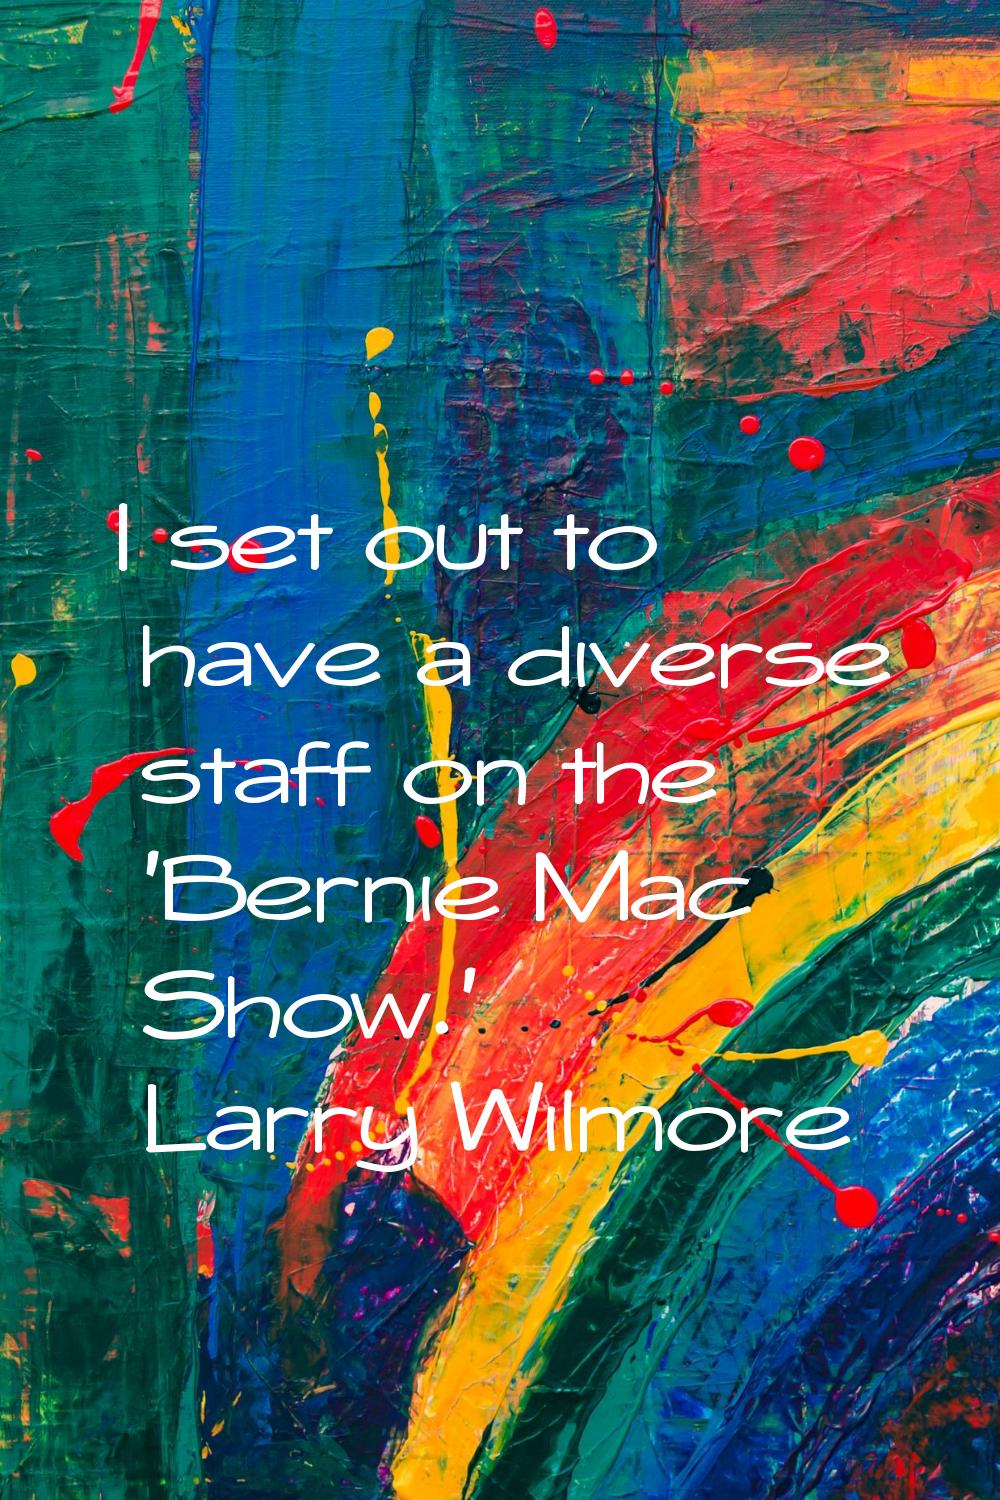 I set out to have a diverse staff on the 'Bernie Mac Show.'